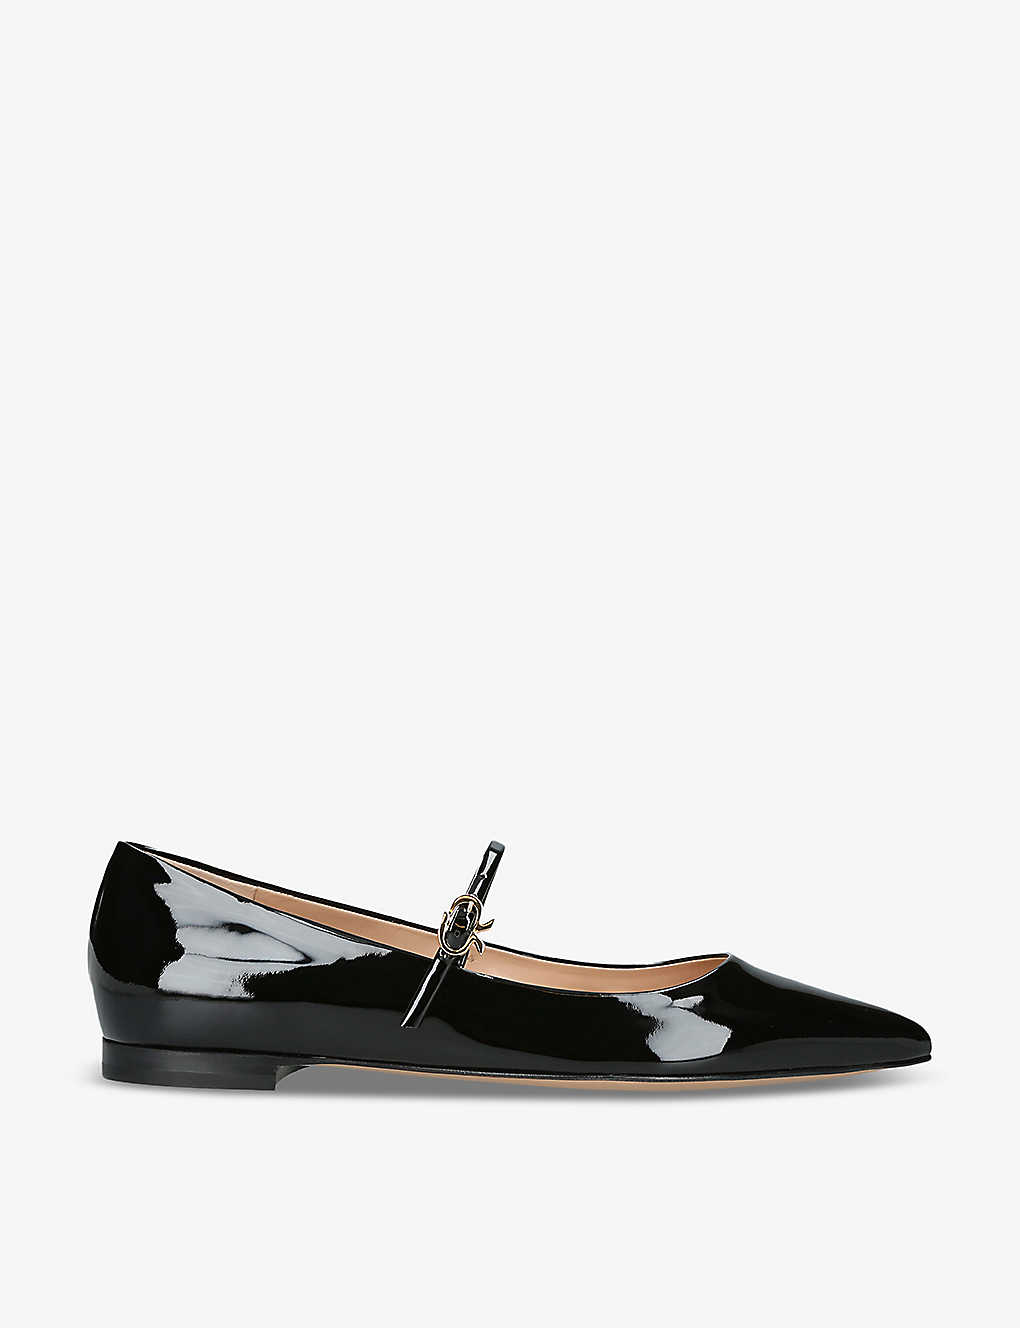 Shop Gianvito Rossi Womens Black Vernice Buckle-embellished Patent-leather Pumps